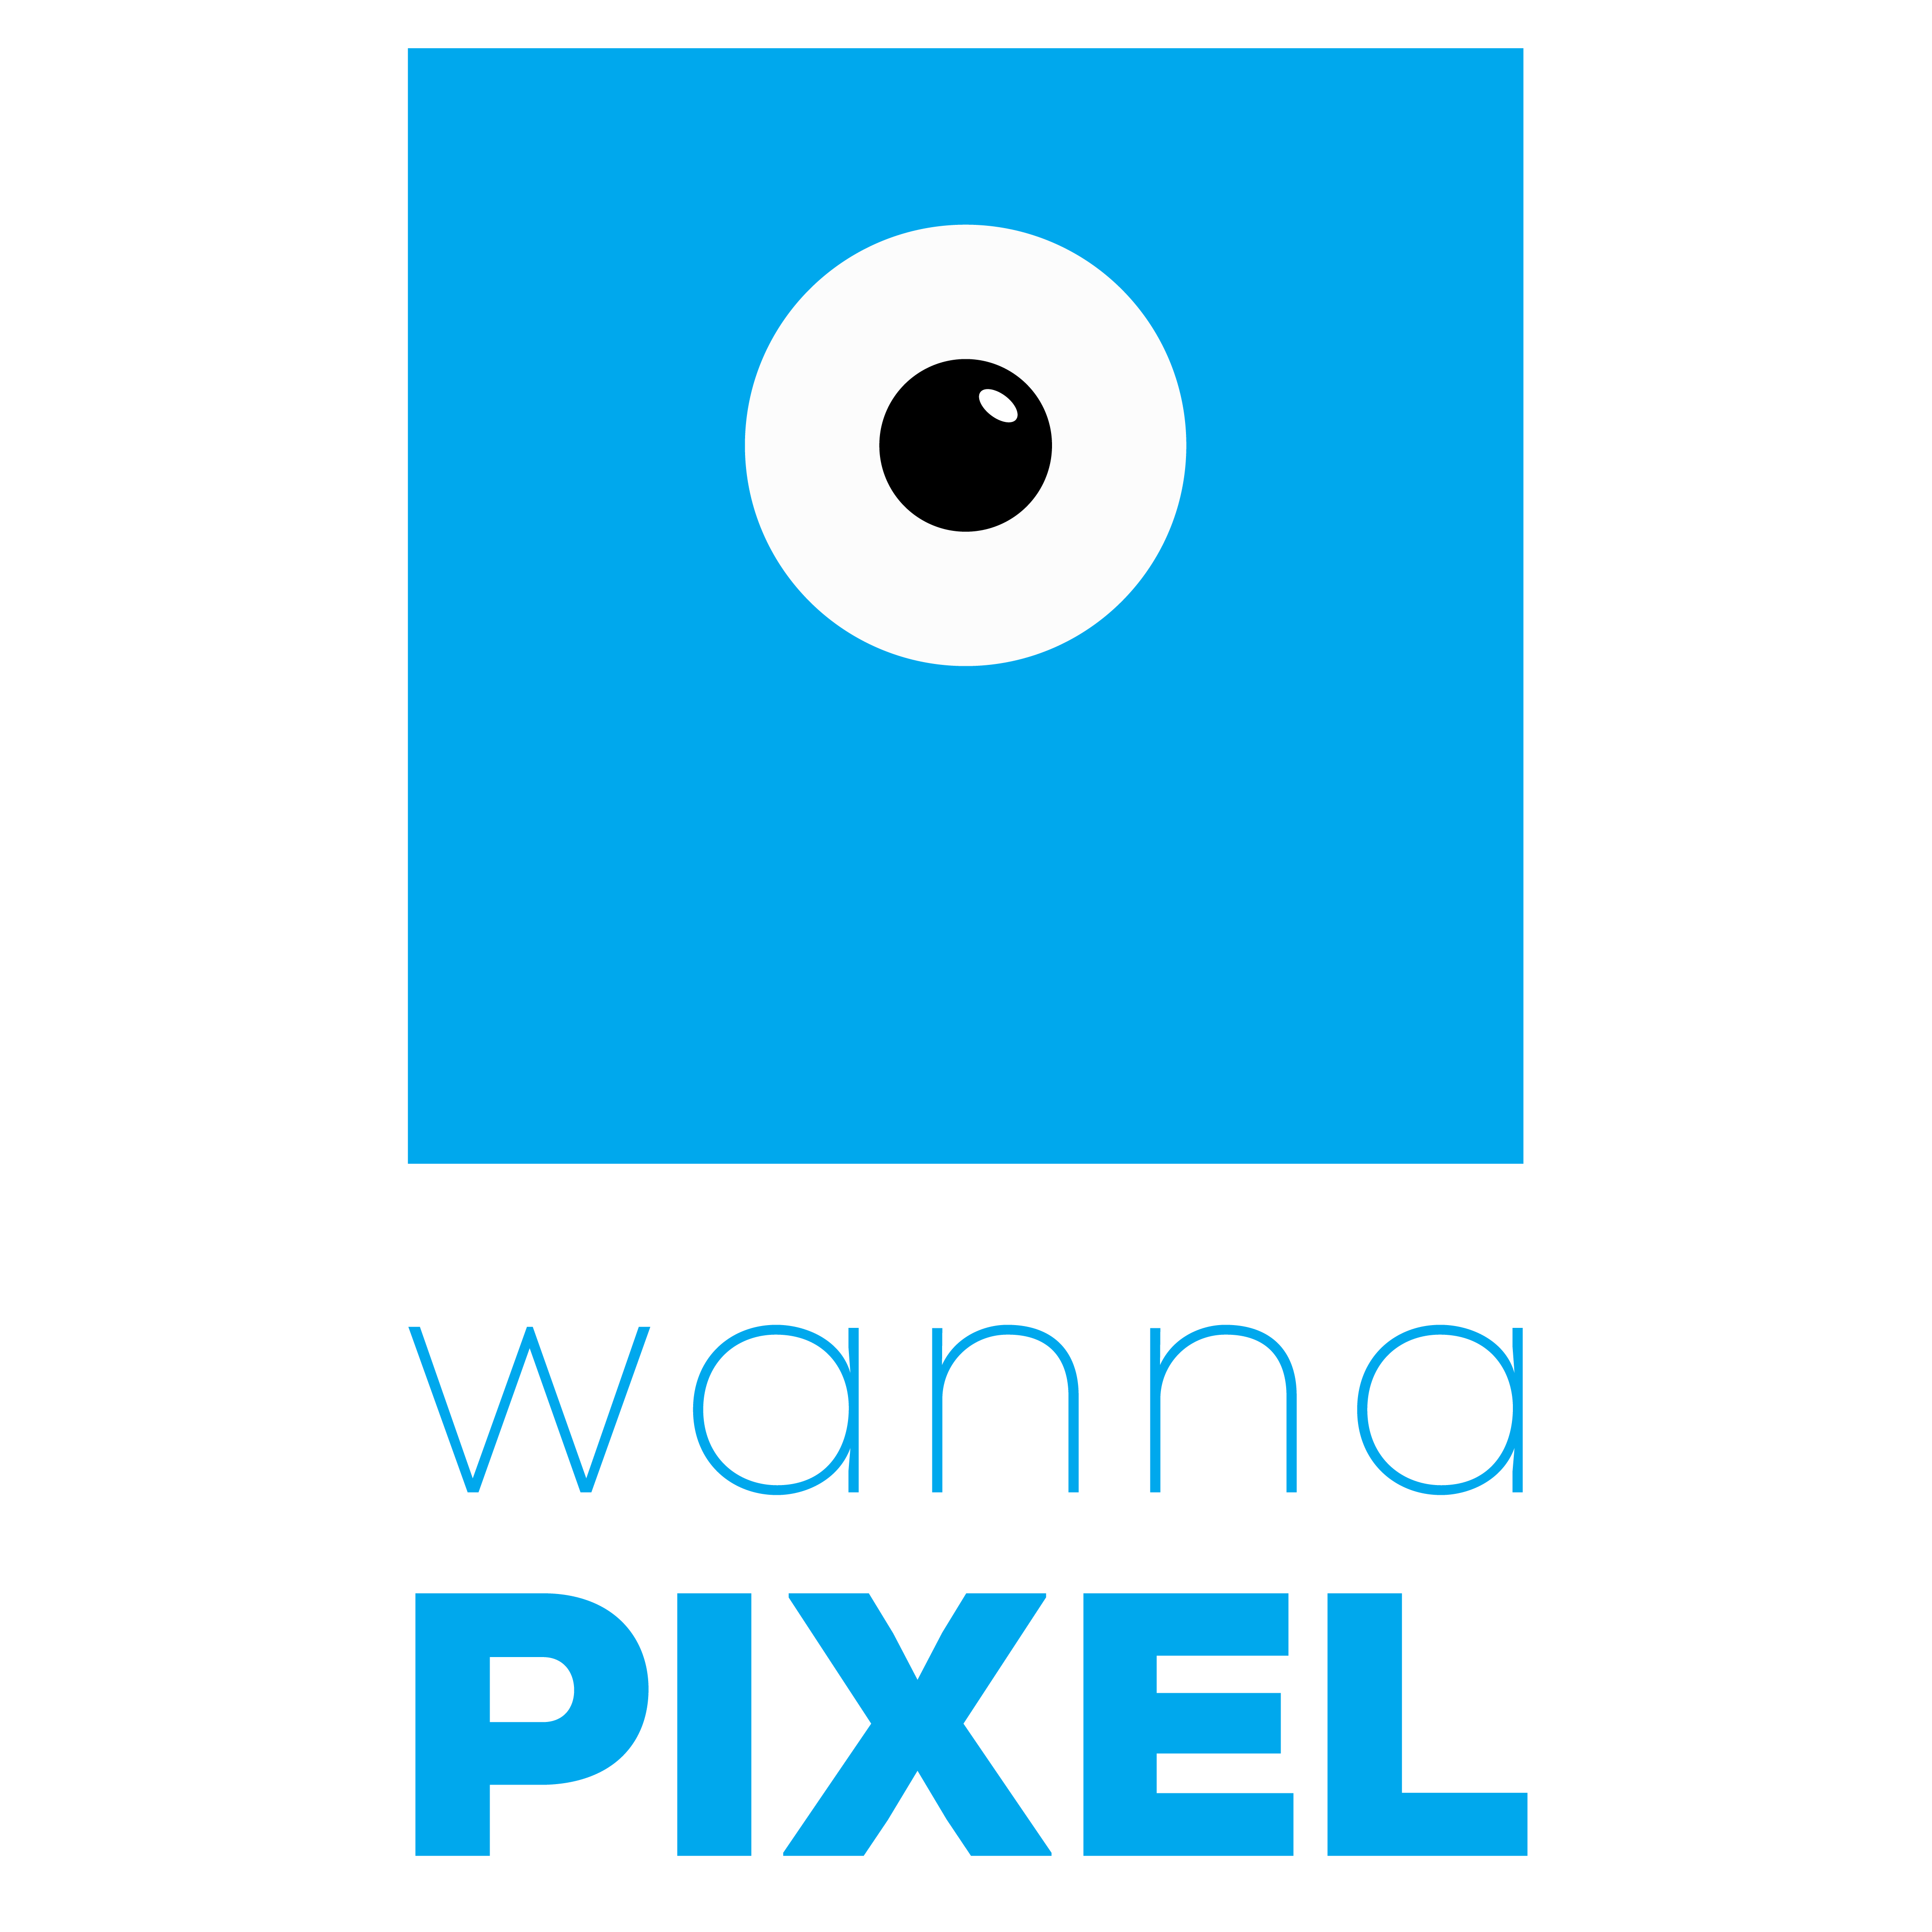 The team at Wanna Pixel believes that, together, Humans and Pixels can change the world! They create #websites and #technology solutions for #socialgood.